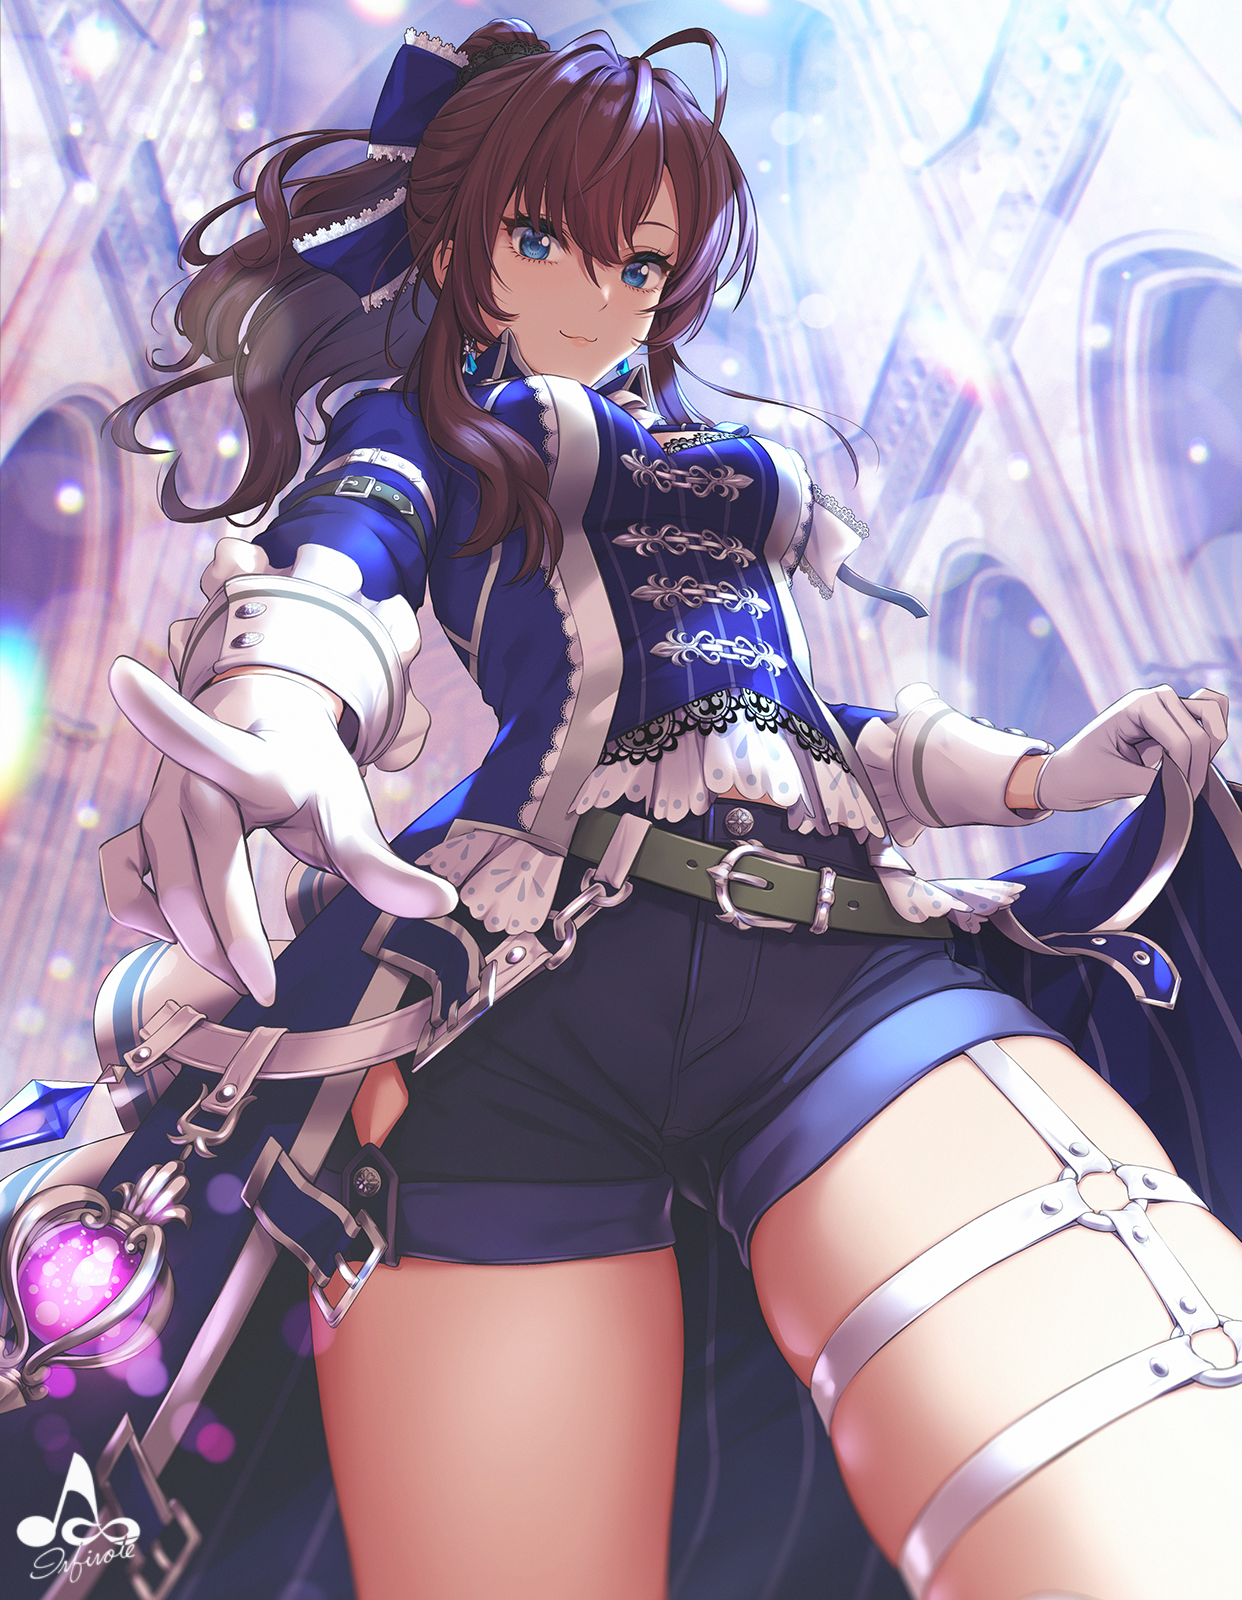 Anime 1242x1600 anime anime girls digital art artwork 2D portrait display brunette blue eyes ponytail low-angle short shorts infinote THE iDOLM@STER Ichinose Shiki looking below finger pointing